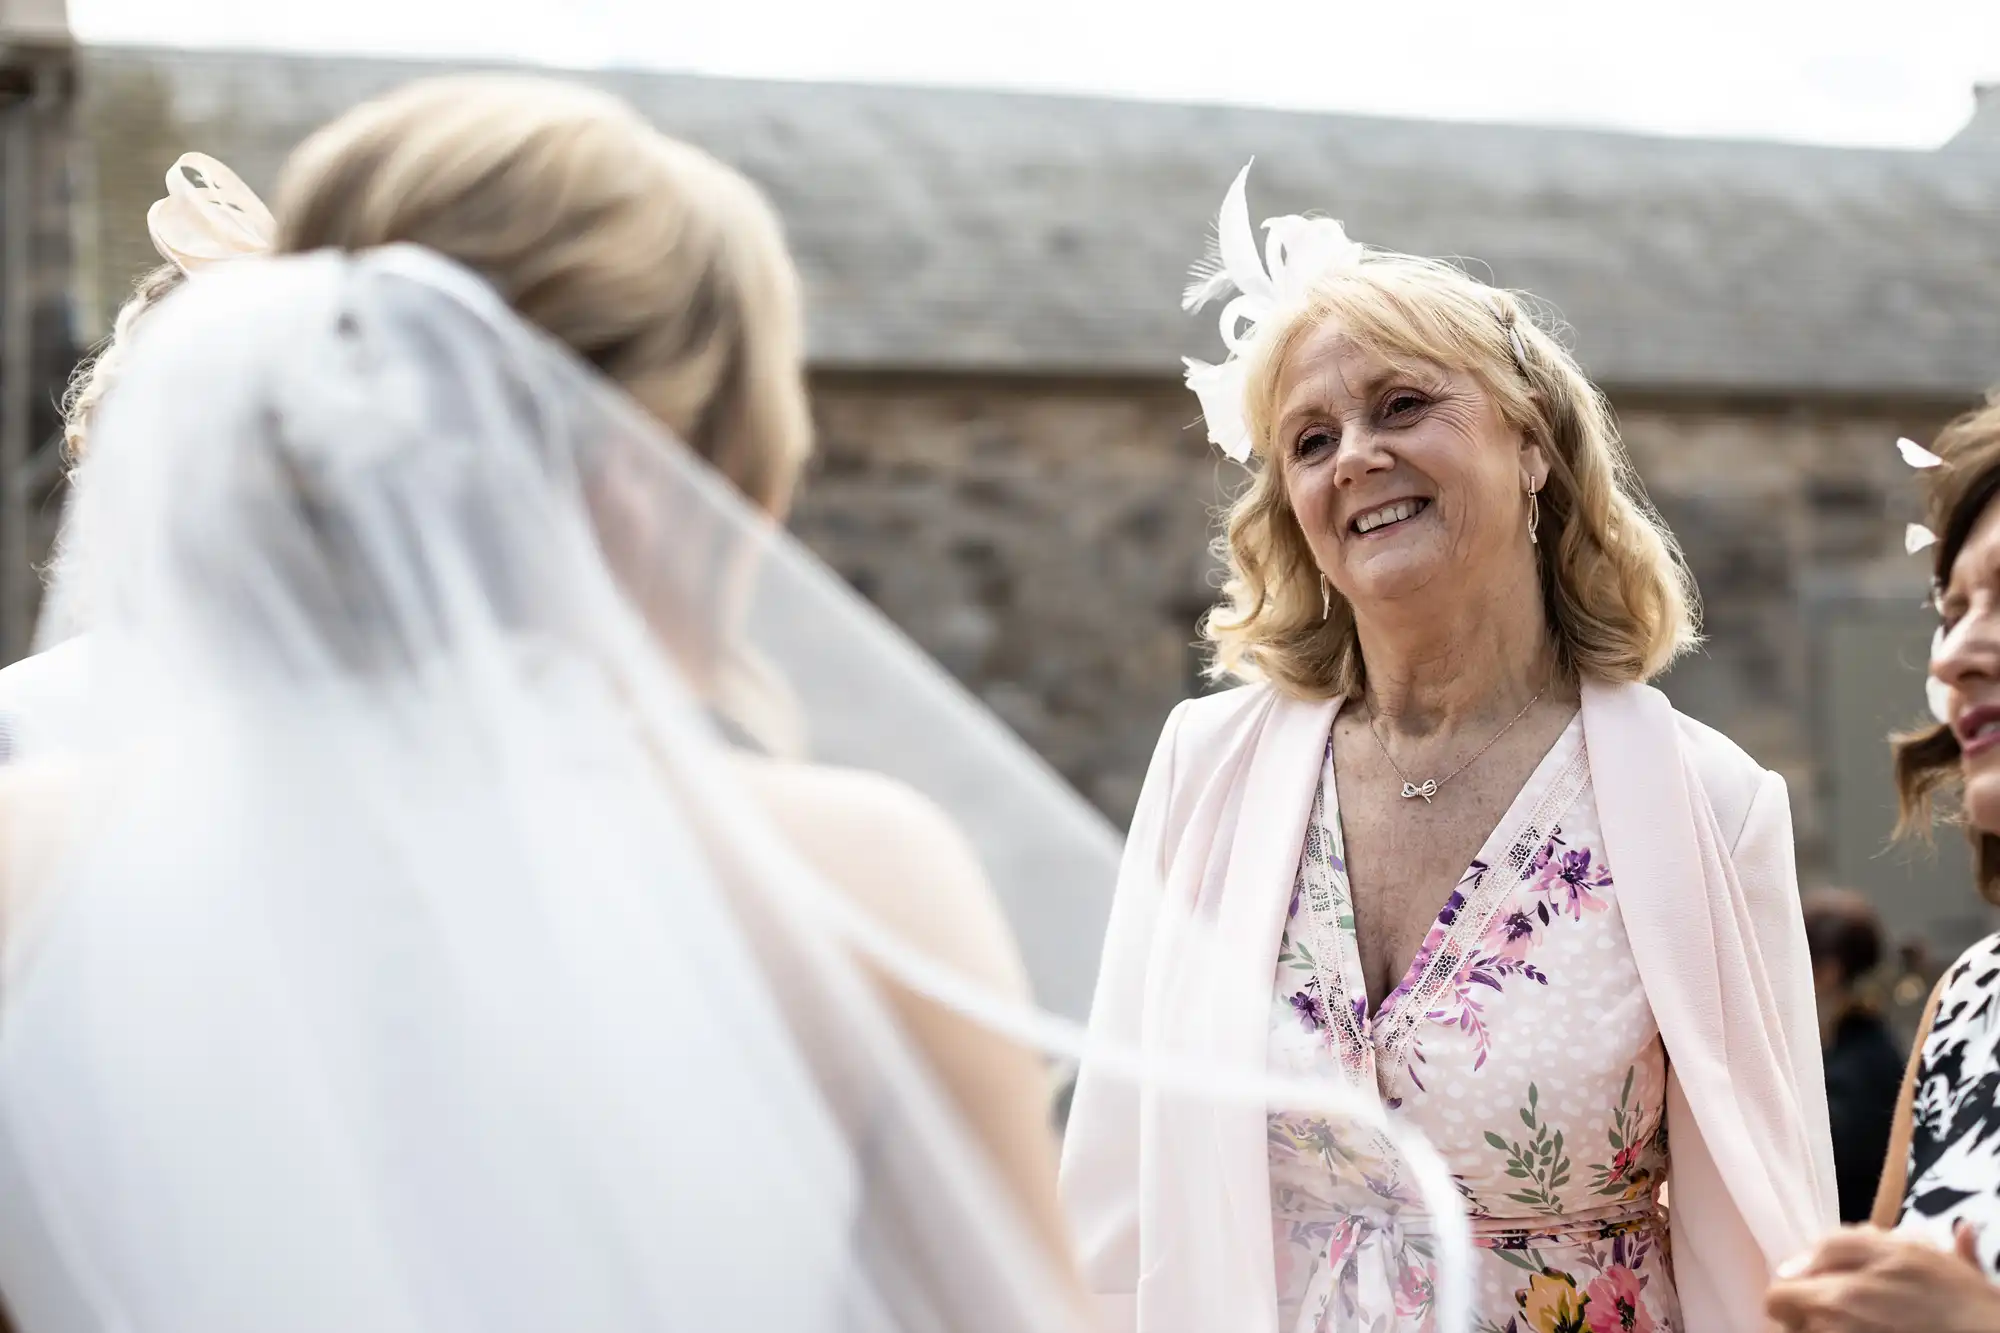 An older woman with blonde hair in a floral dress smiles at a bride wearing a veil, at an outdoor wedding ceremony.